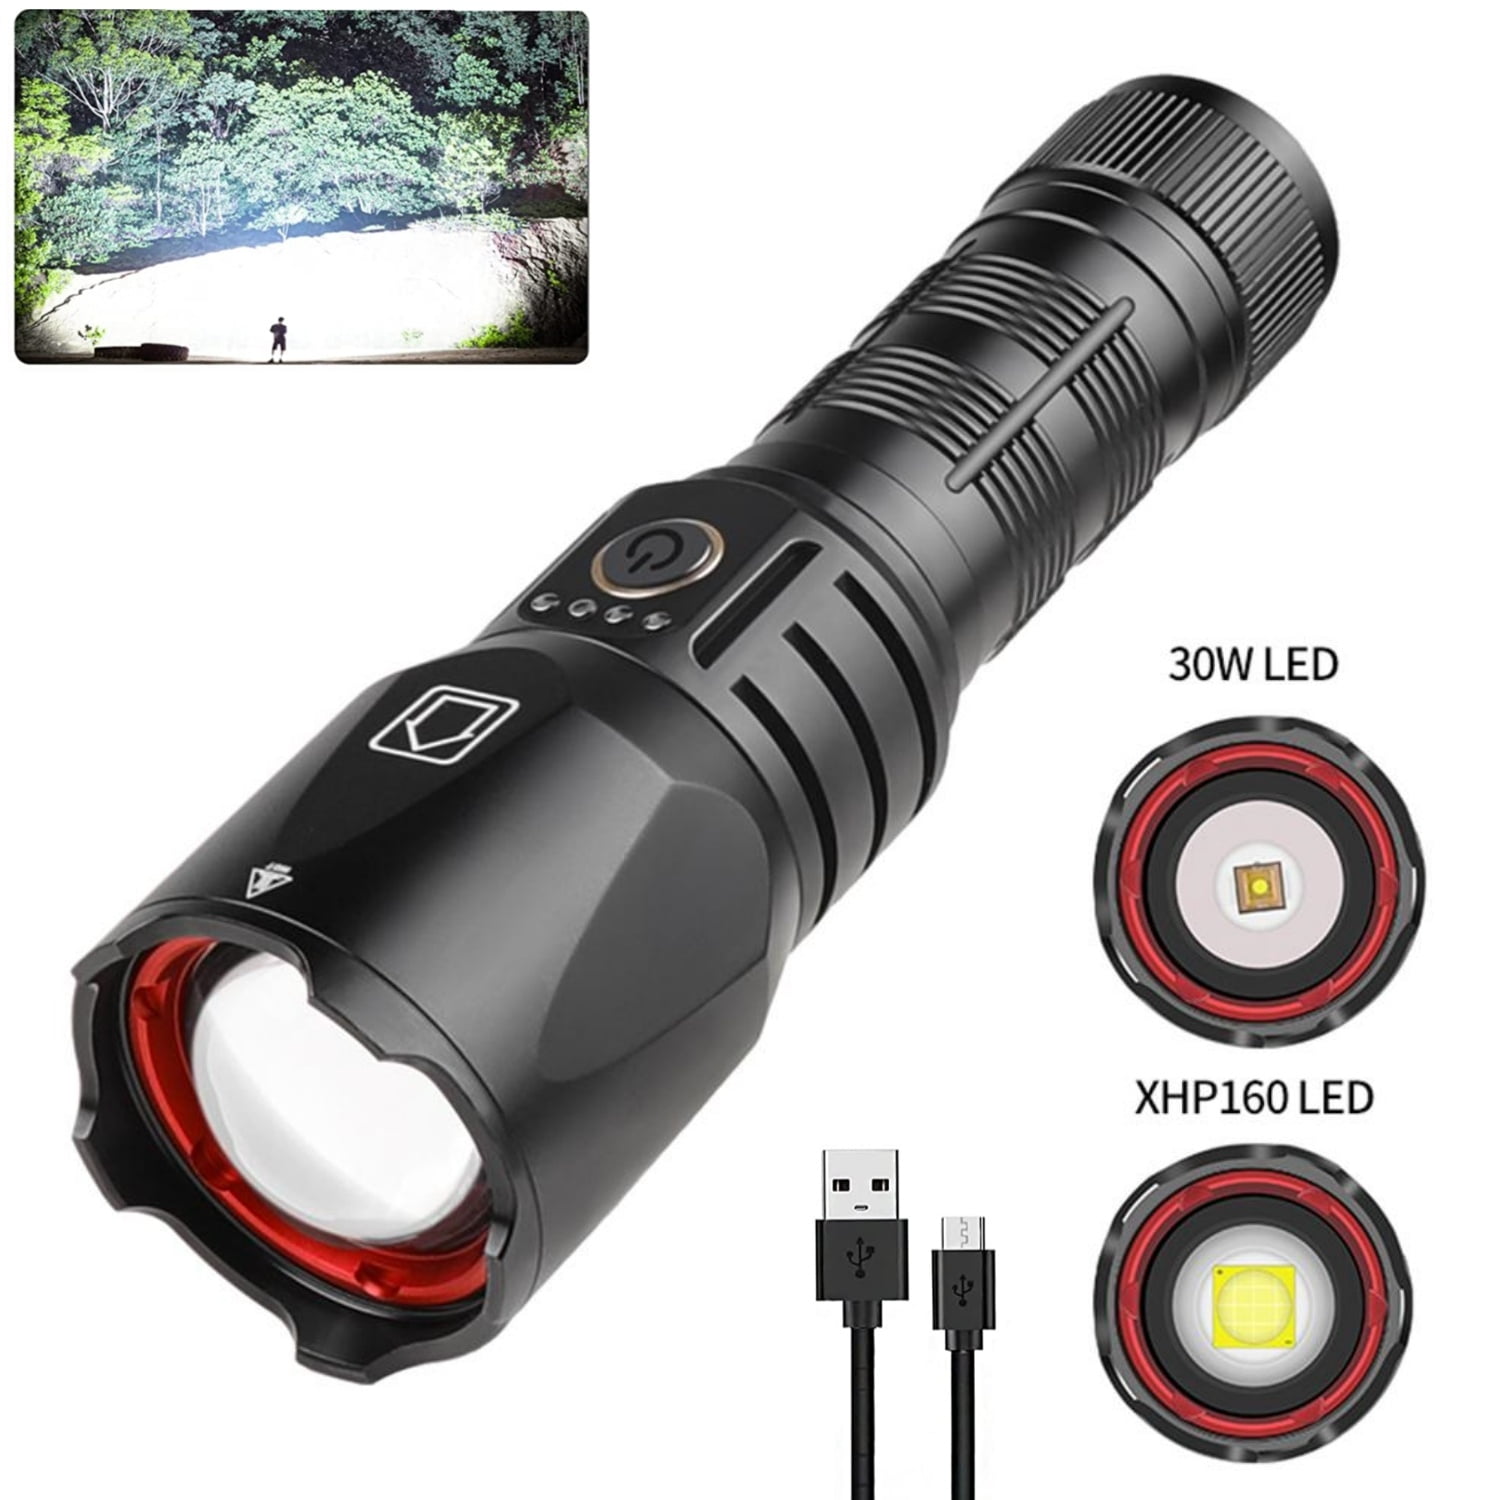 Laighter Flashlight, 120000 High Lumens Rechargeable Flashlights, Super  Bright XHP160 LED, Light Modes, Waterproof, Zoomable Torch for Outdoor  Camping Hiking Hunting, Emergencies